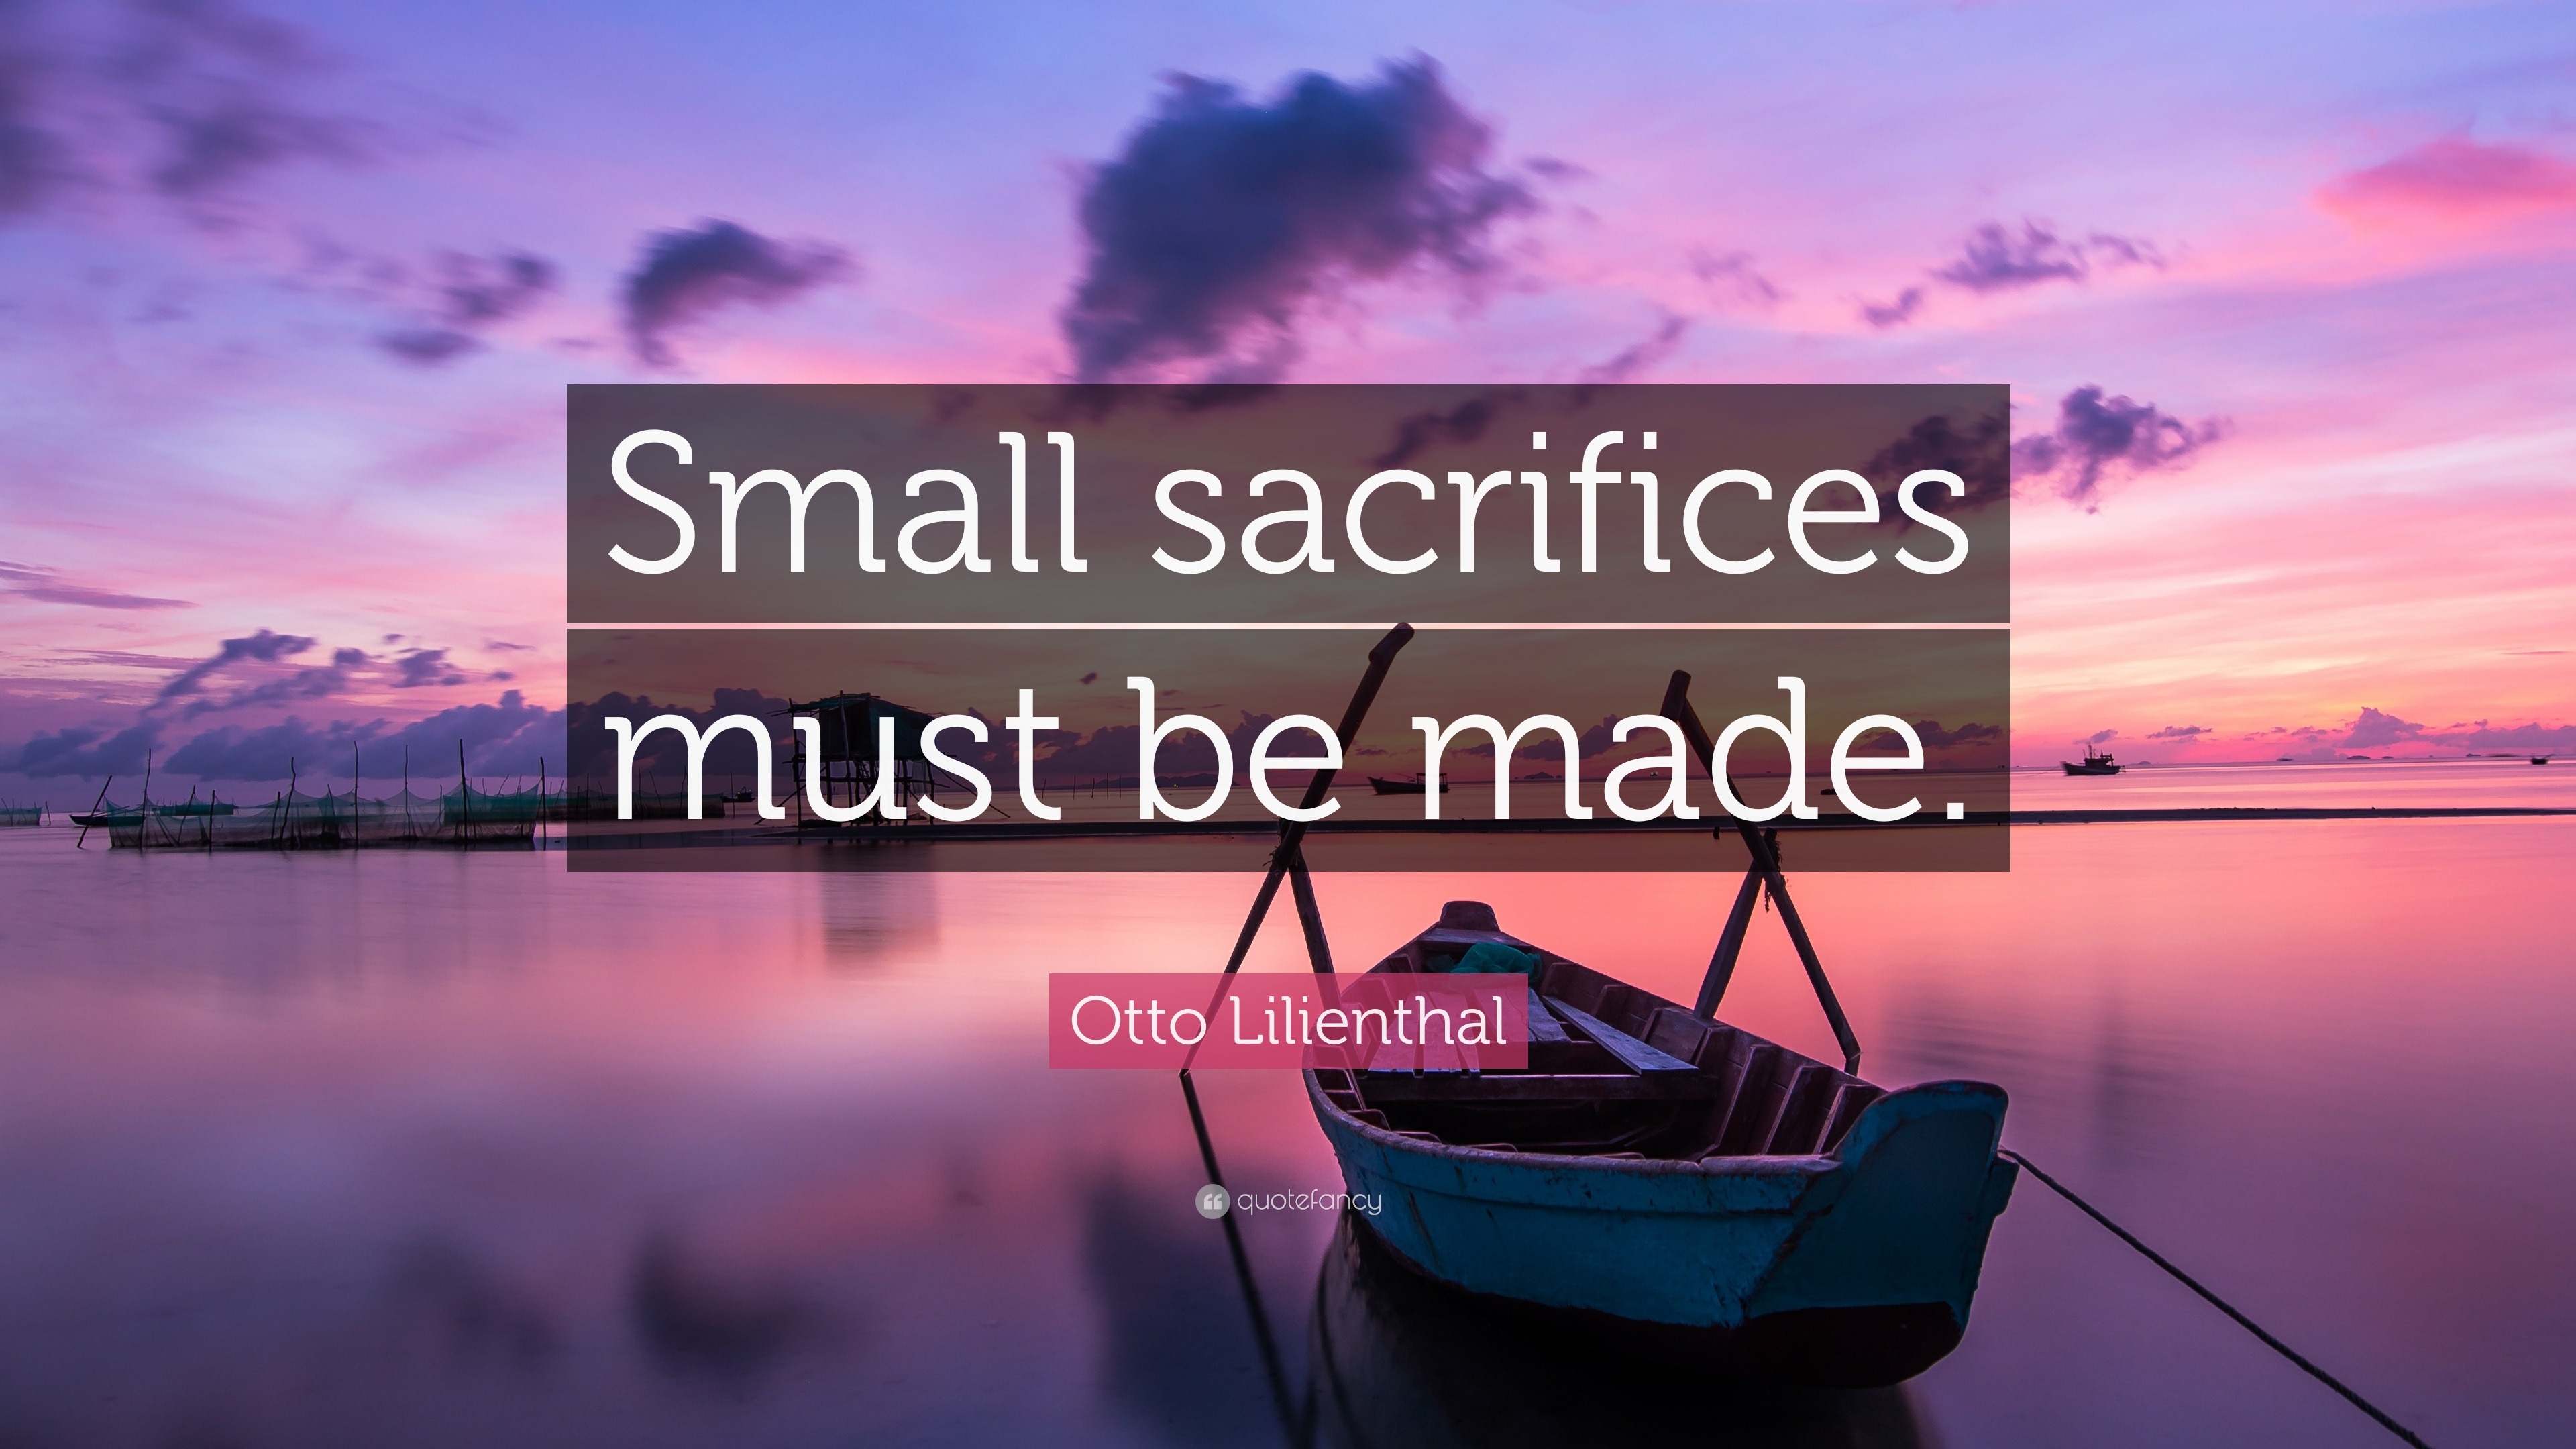 Otto Lilienthal quote: Small sacrifices must be made.